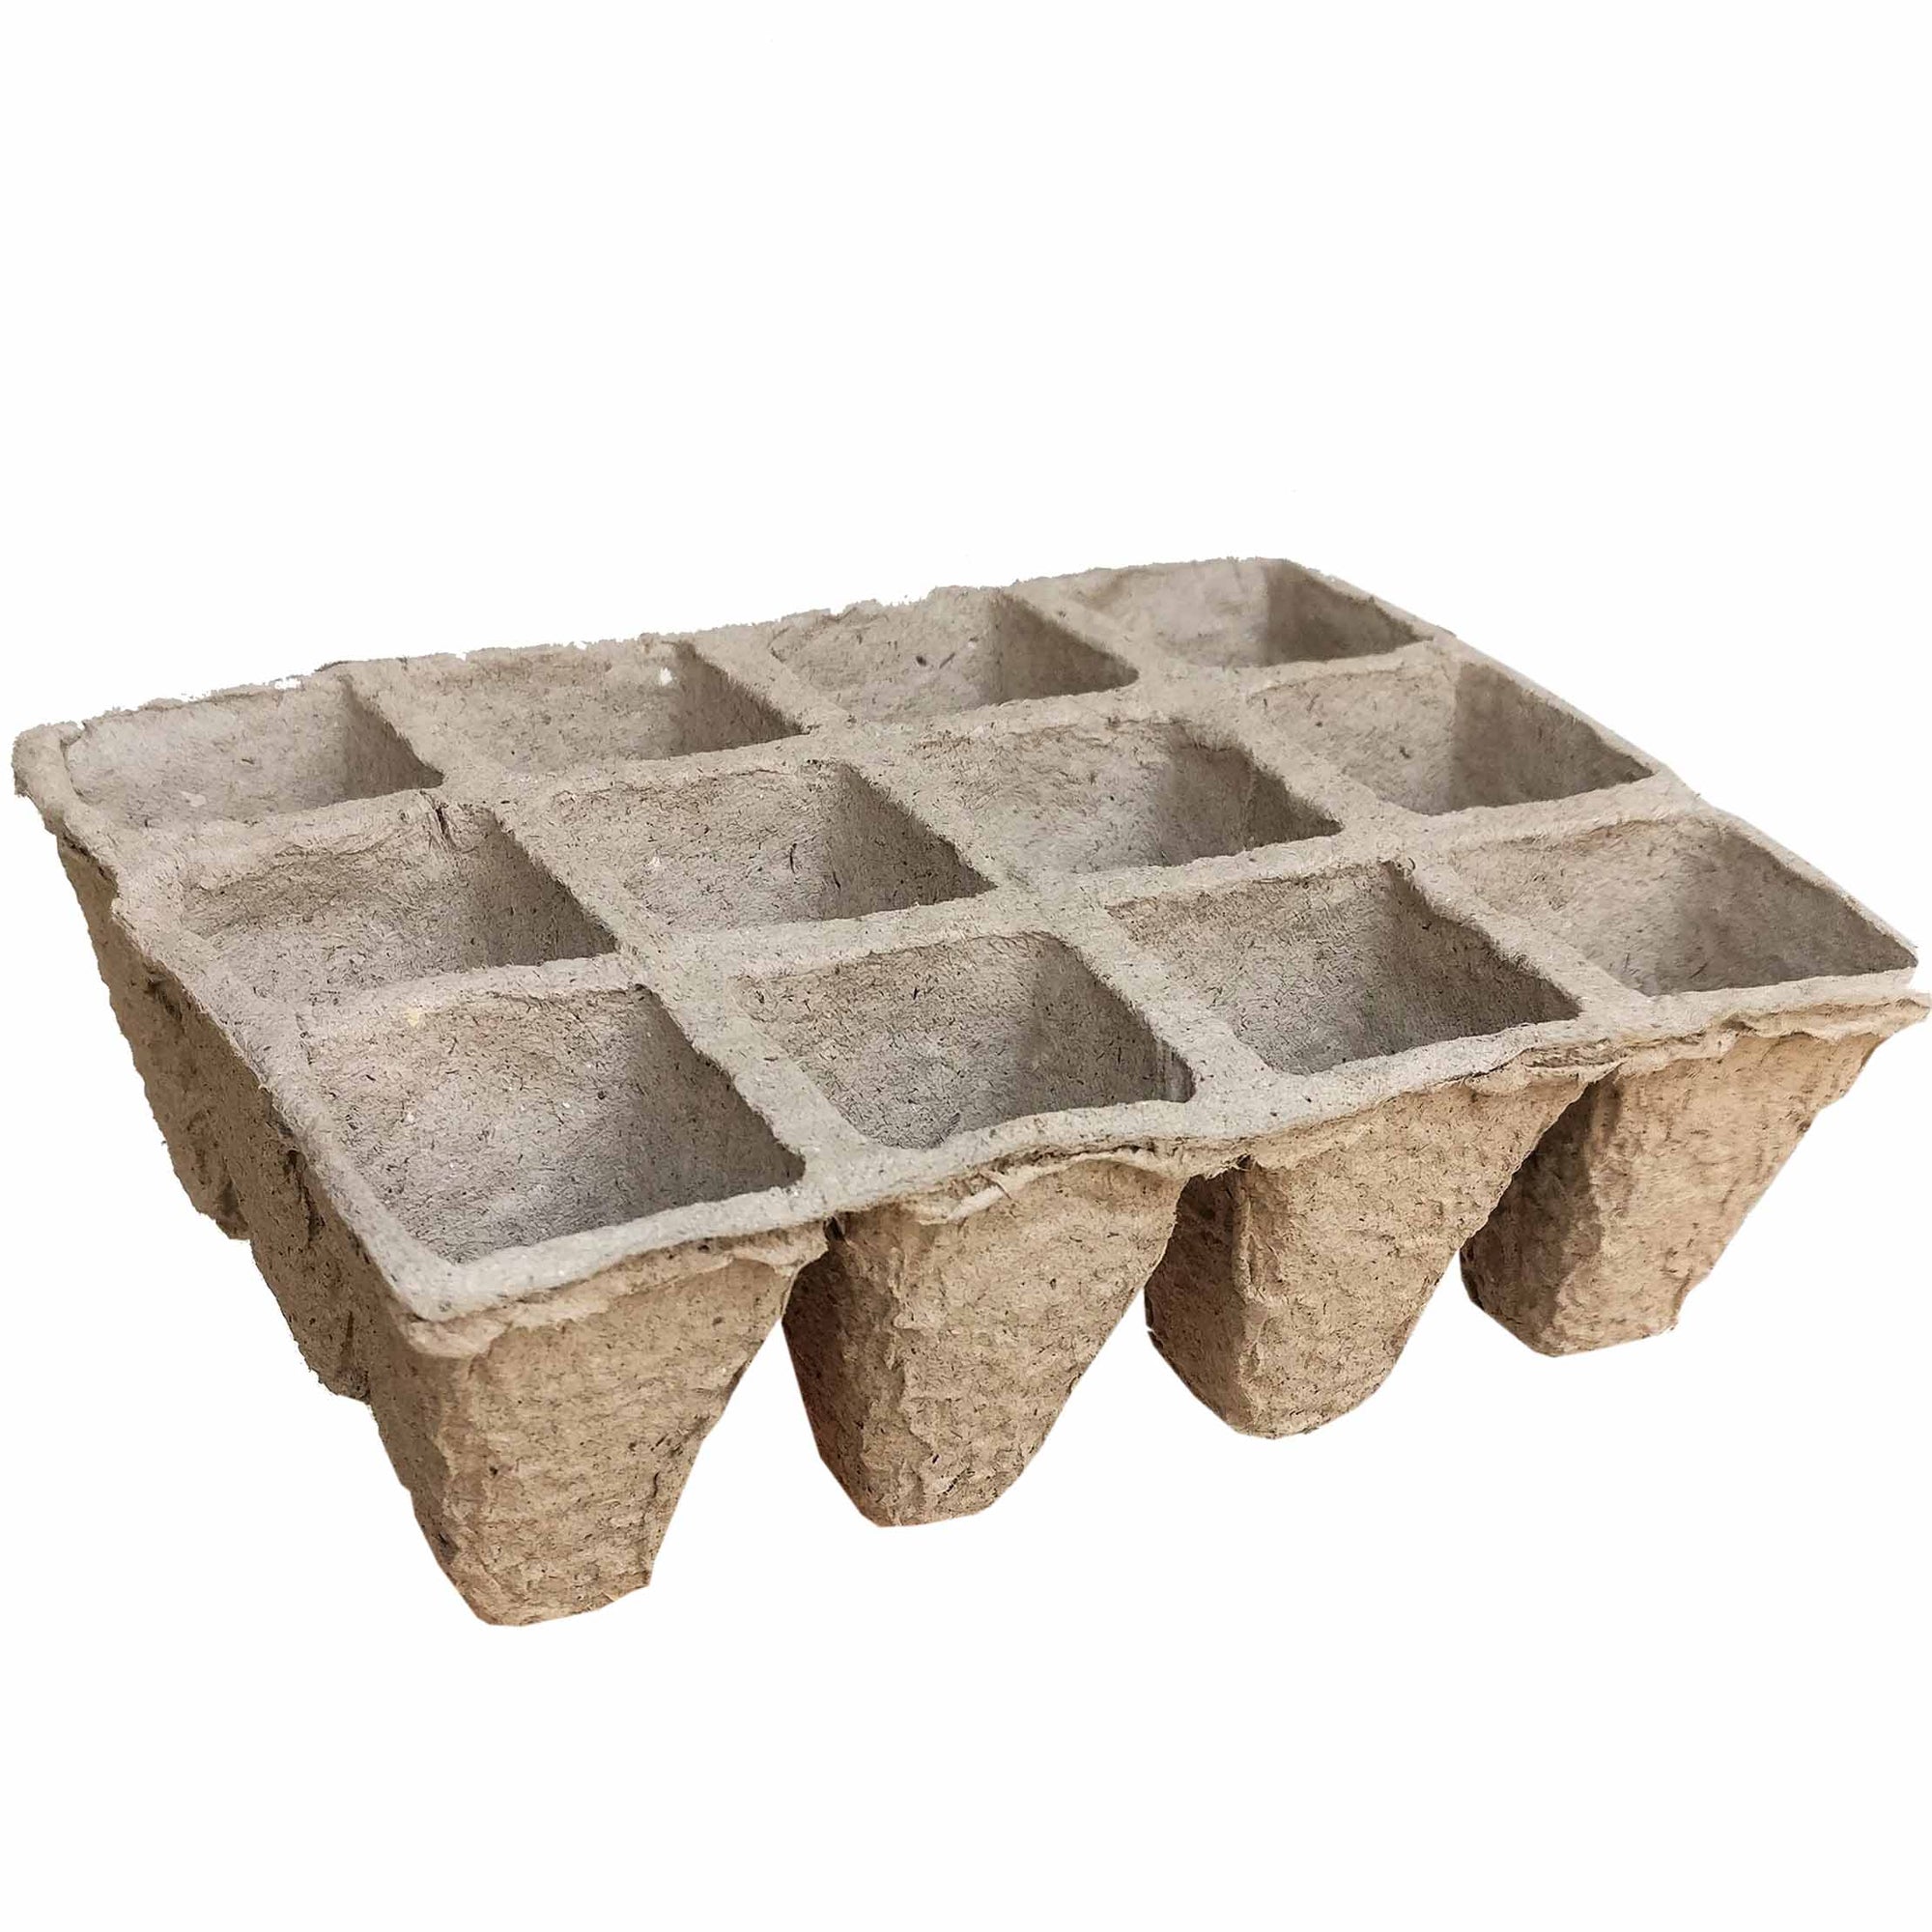 biodegradable tray 12 cells, peat seedling starter trays, biodegradable tray